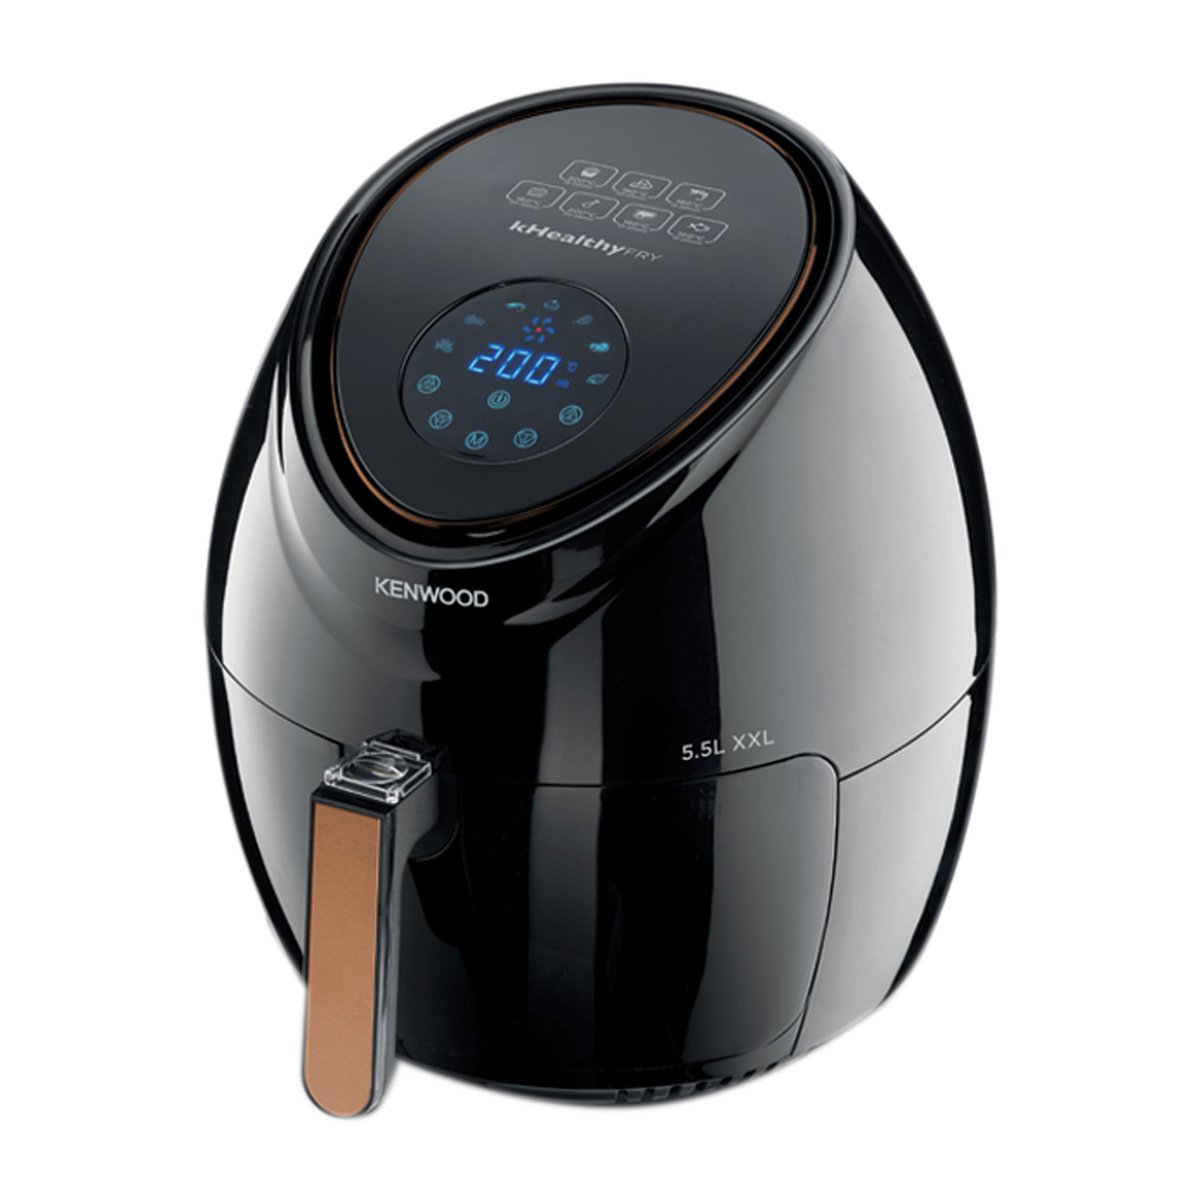 Kenwood Air Fryer 5.5 Litre, only 1 oil spoon, HFP50, Touch Screen Display, Black Rose Gold, 1 Years Warranty